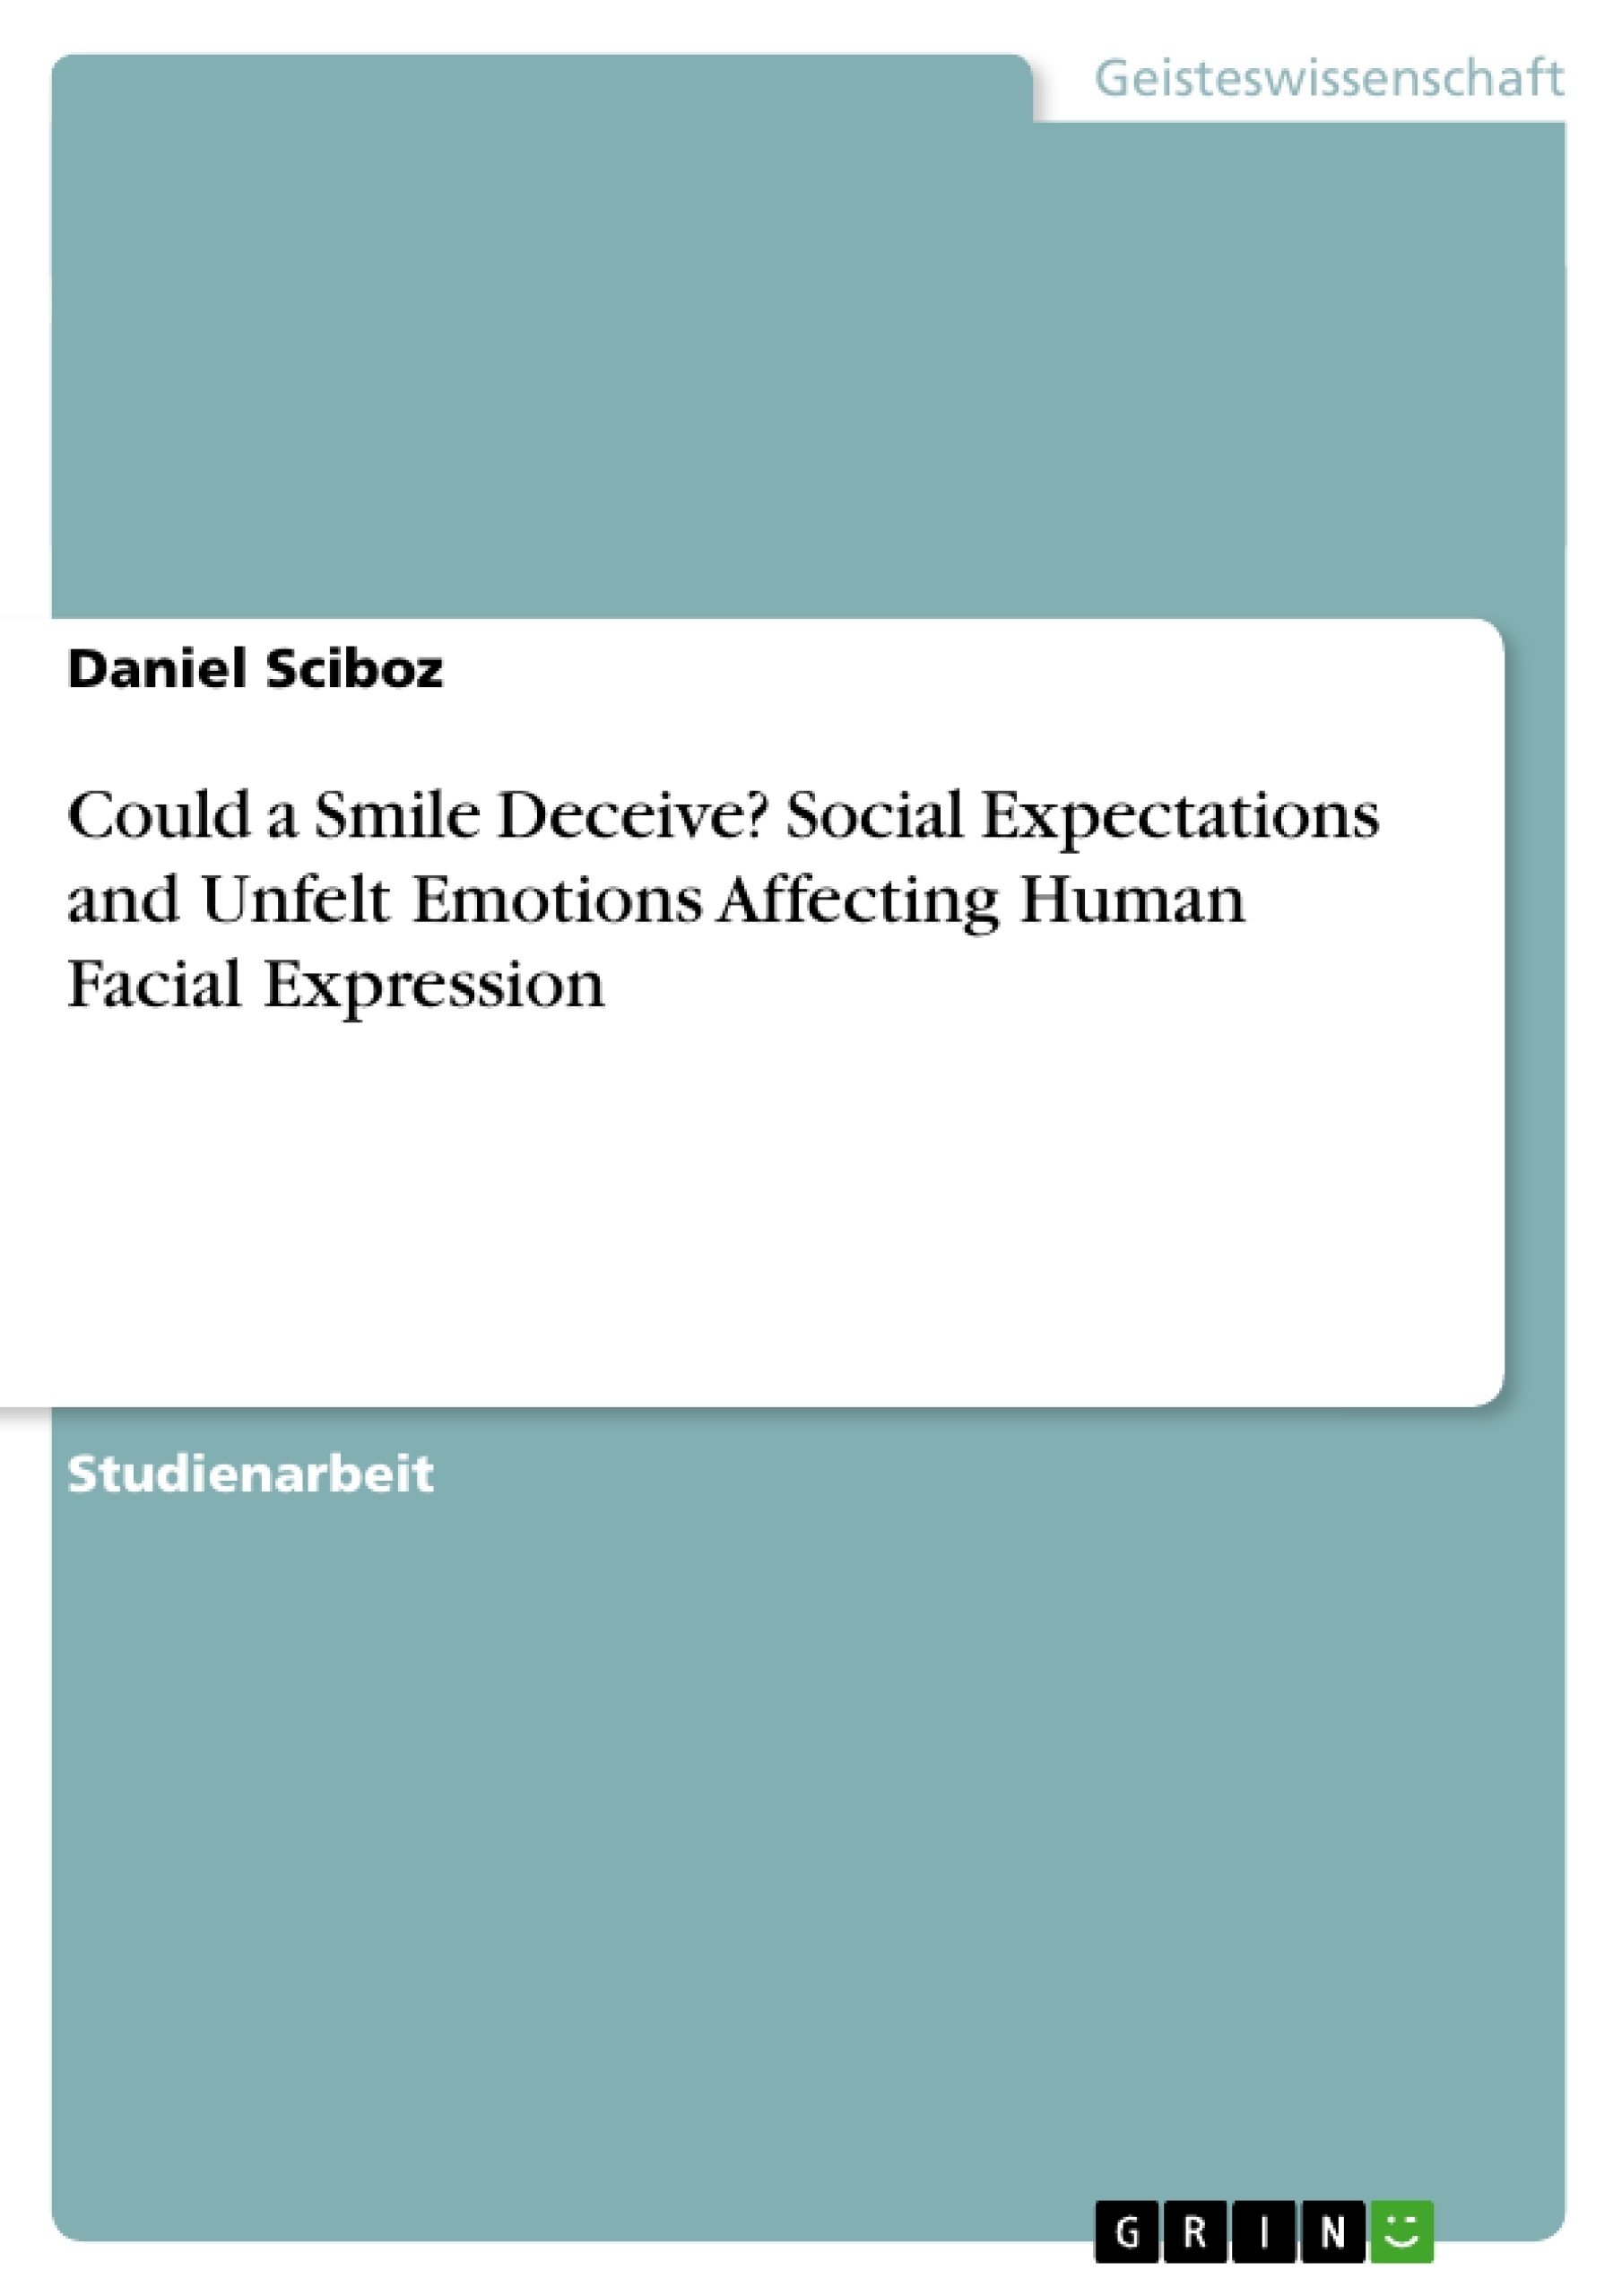 Titel: Could a Smile Deceive? Social Expectations and Unfelt Emotions Affecting Human Facial Expression